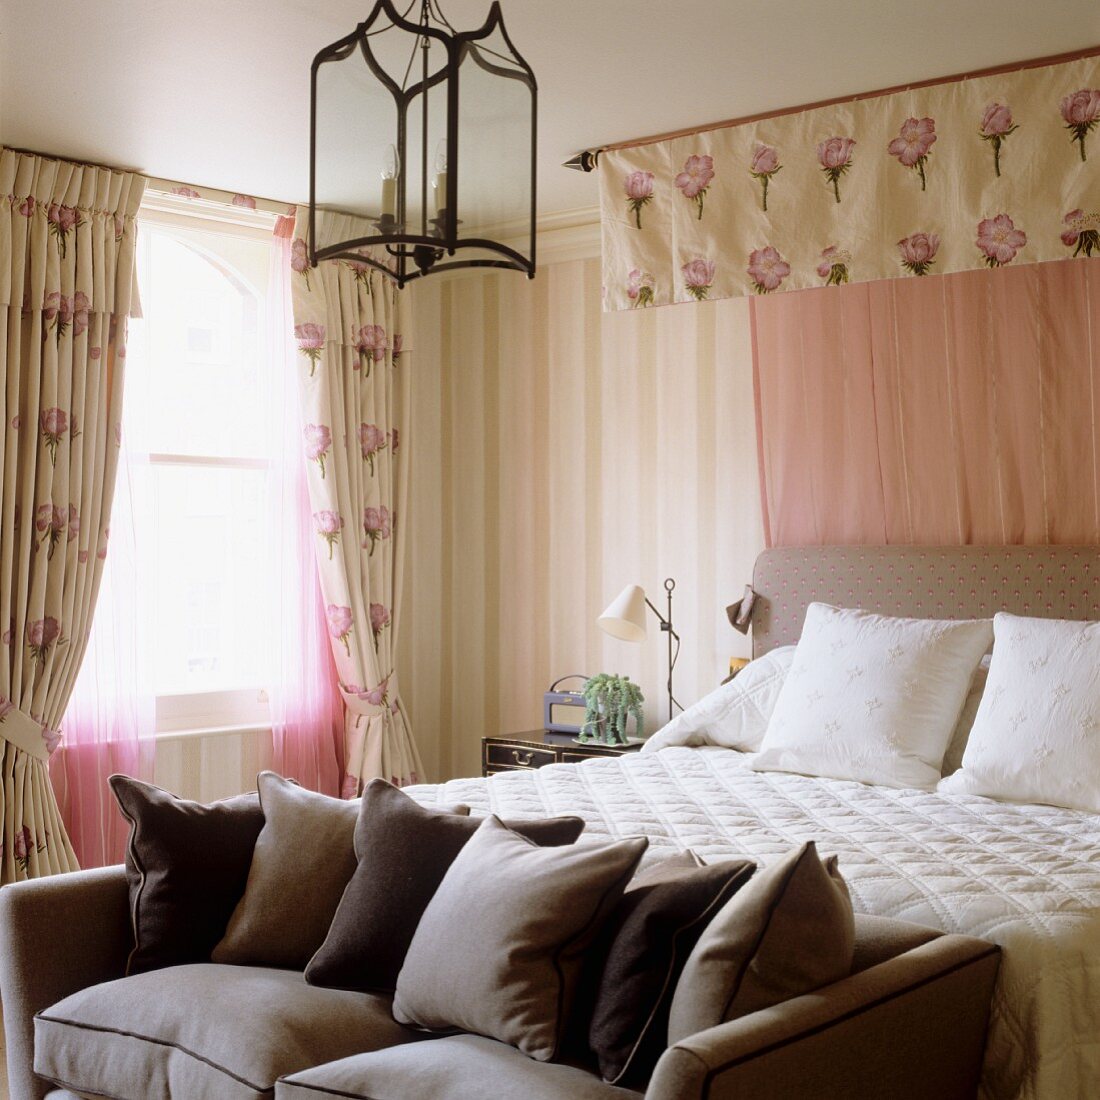 Scatter cushions on sofa at foot of double bed with canopy in traditional bedroom